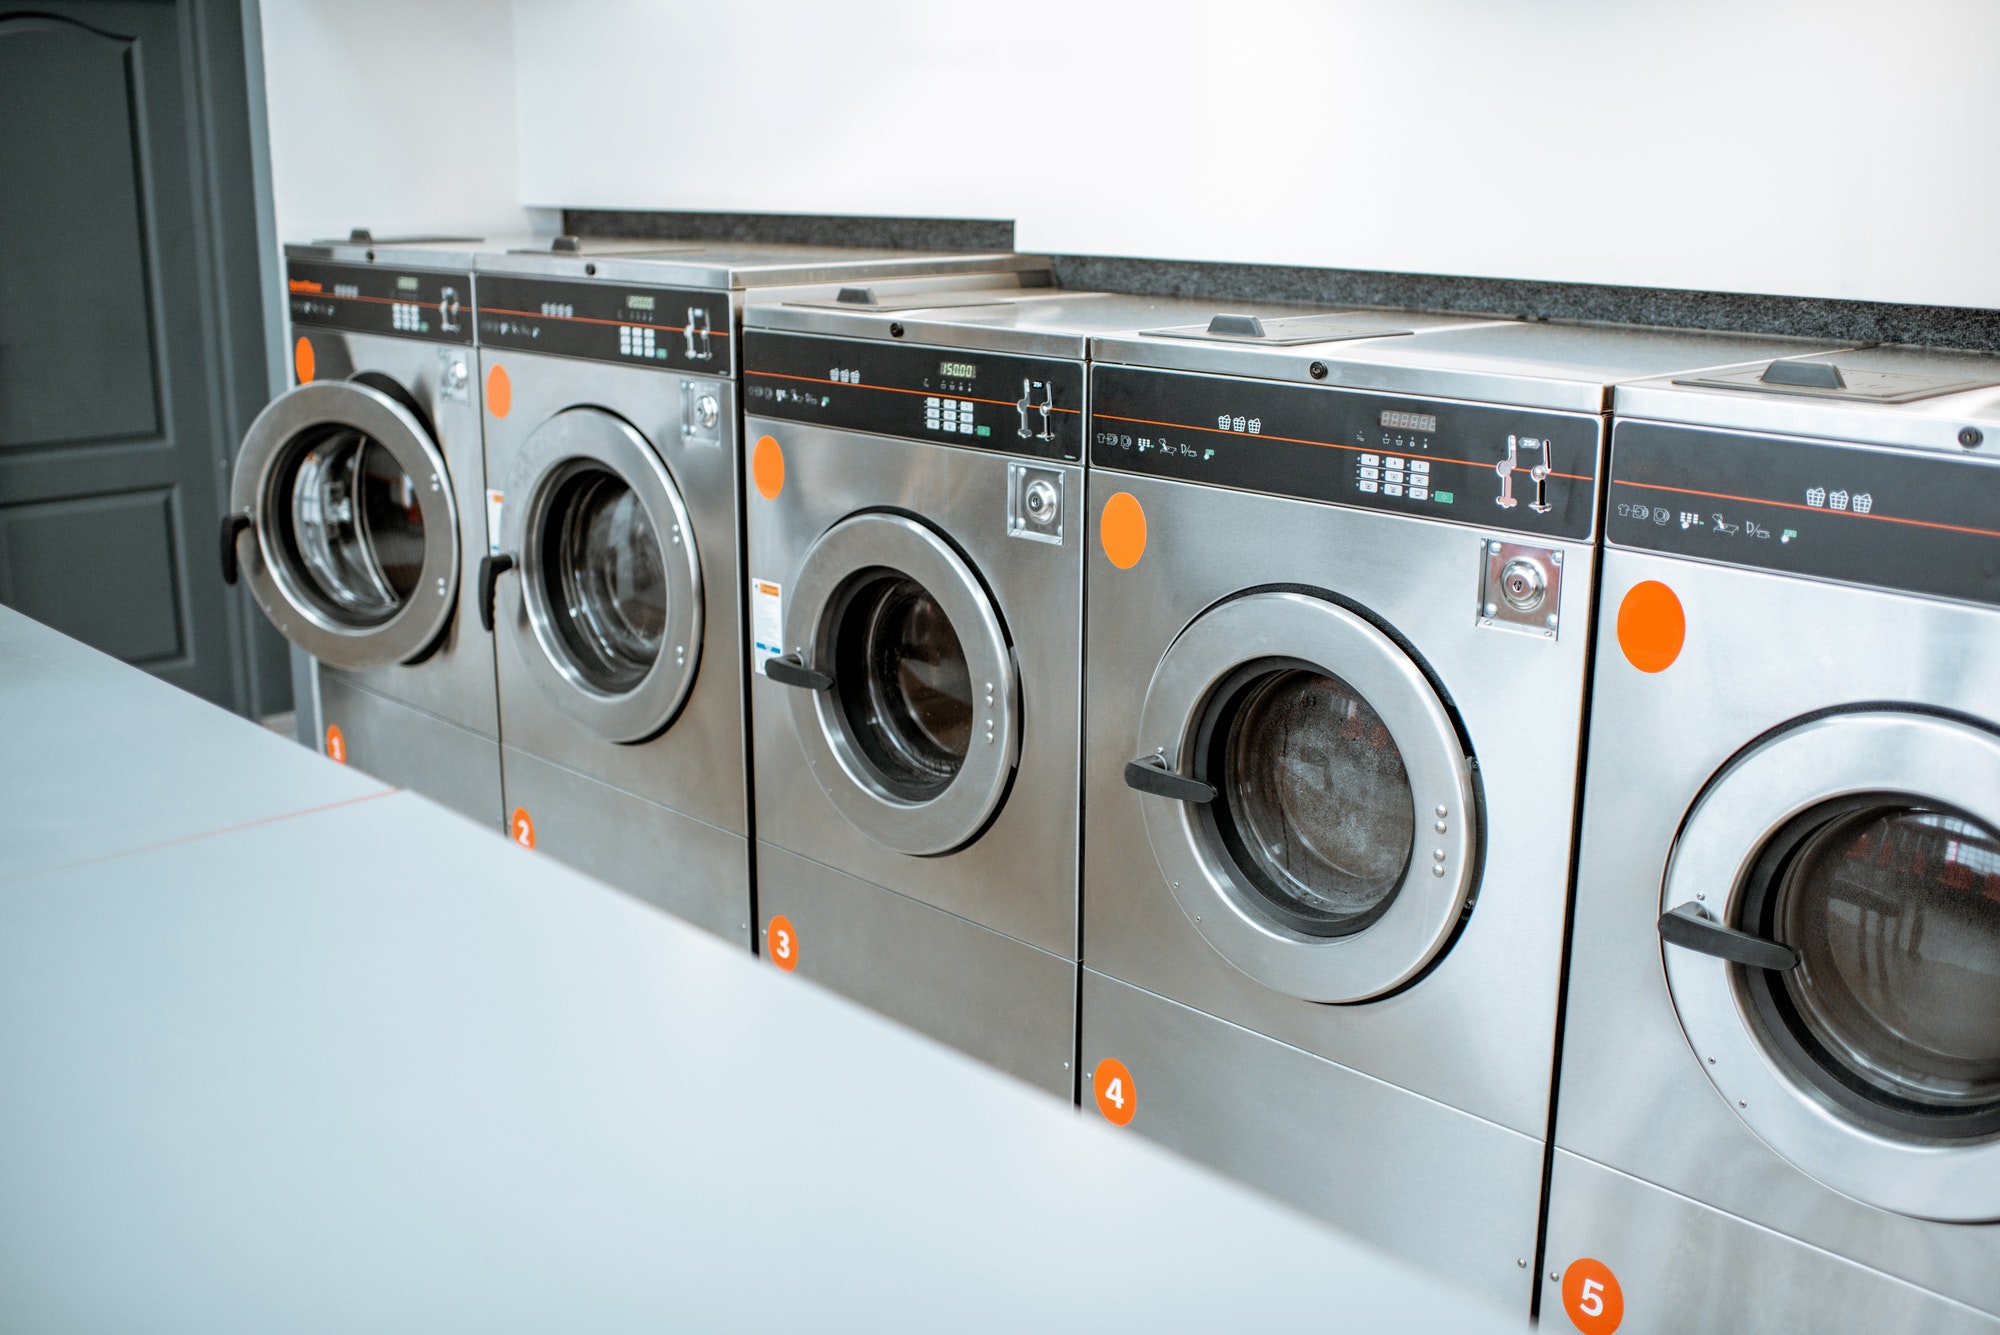 Washing machines in the laundry